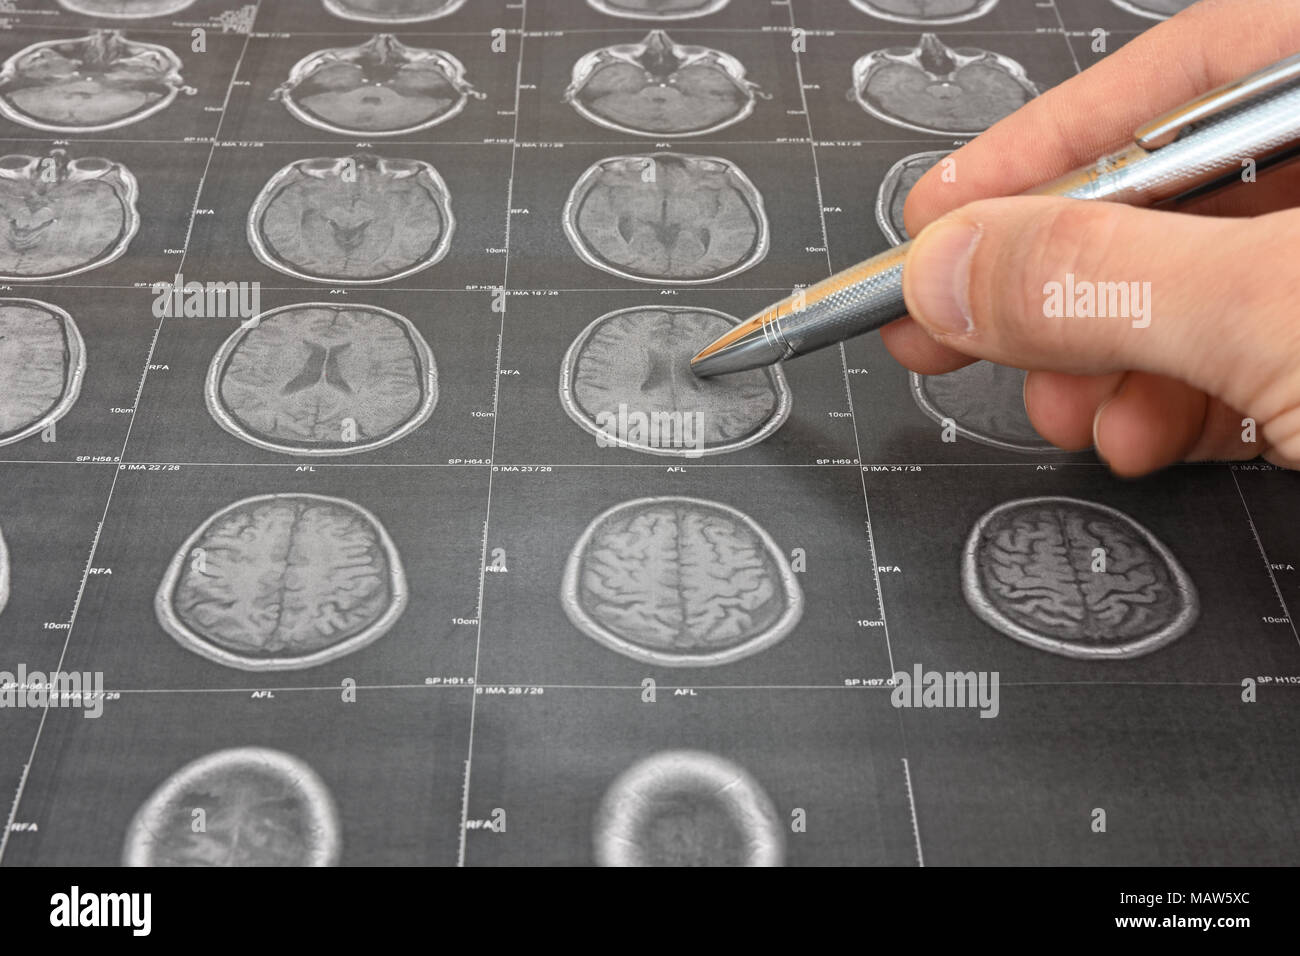 Doctor hand with a pen pointing at a MRI scan (transverse view) of the human brain Stock Photo